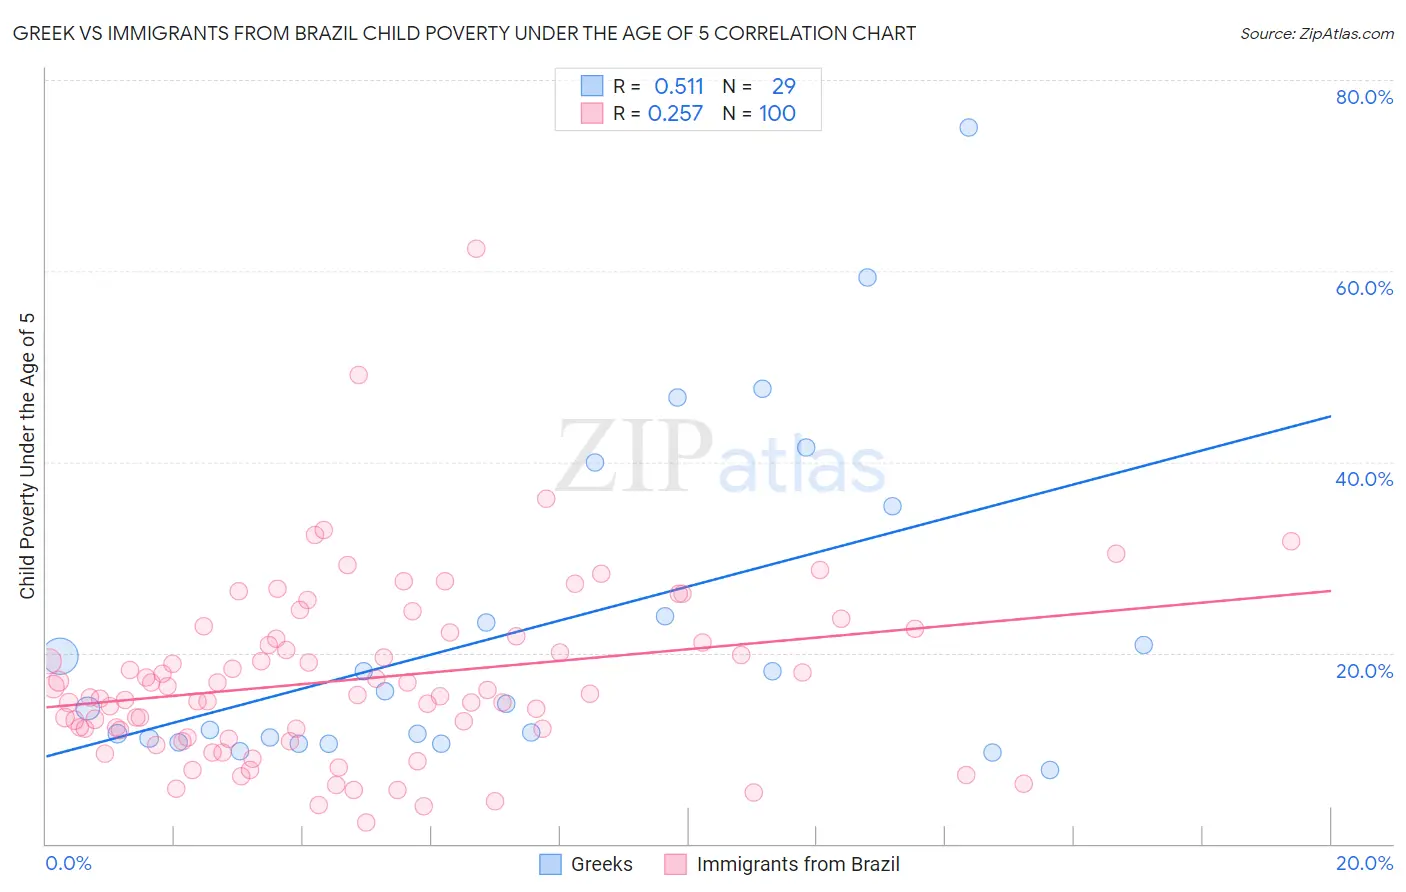 Greek vs Immigrants from Brazil Child Poverty Under the Age of 5